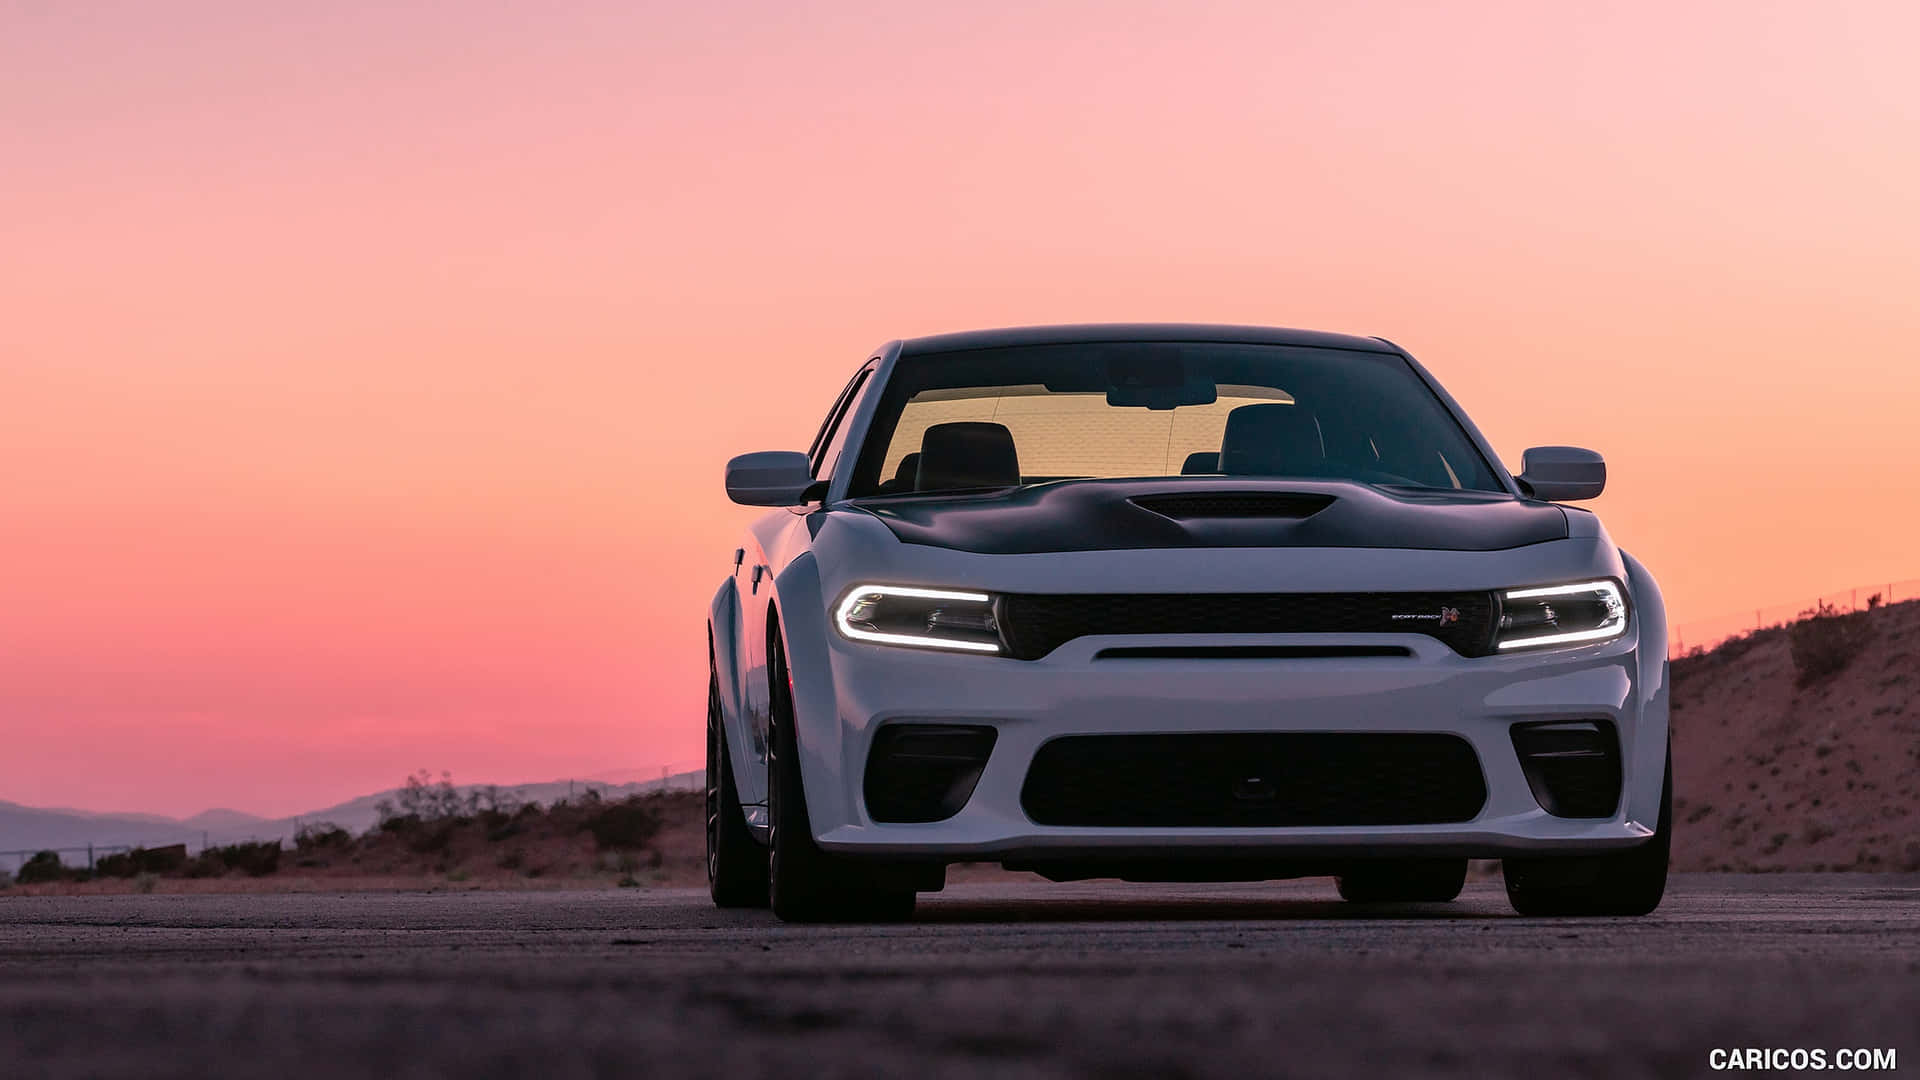 Say hello to Dodge's most powerful line of performance cars, the Scat Pack. Wallpaper